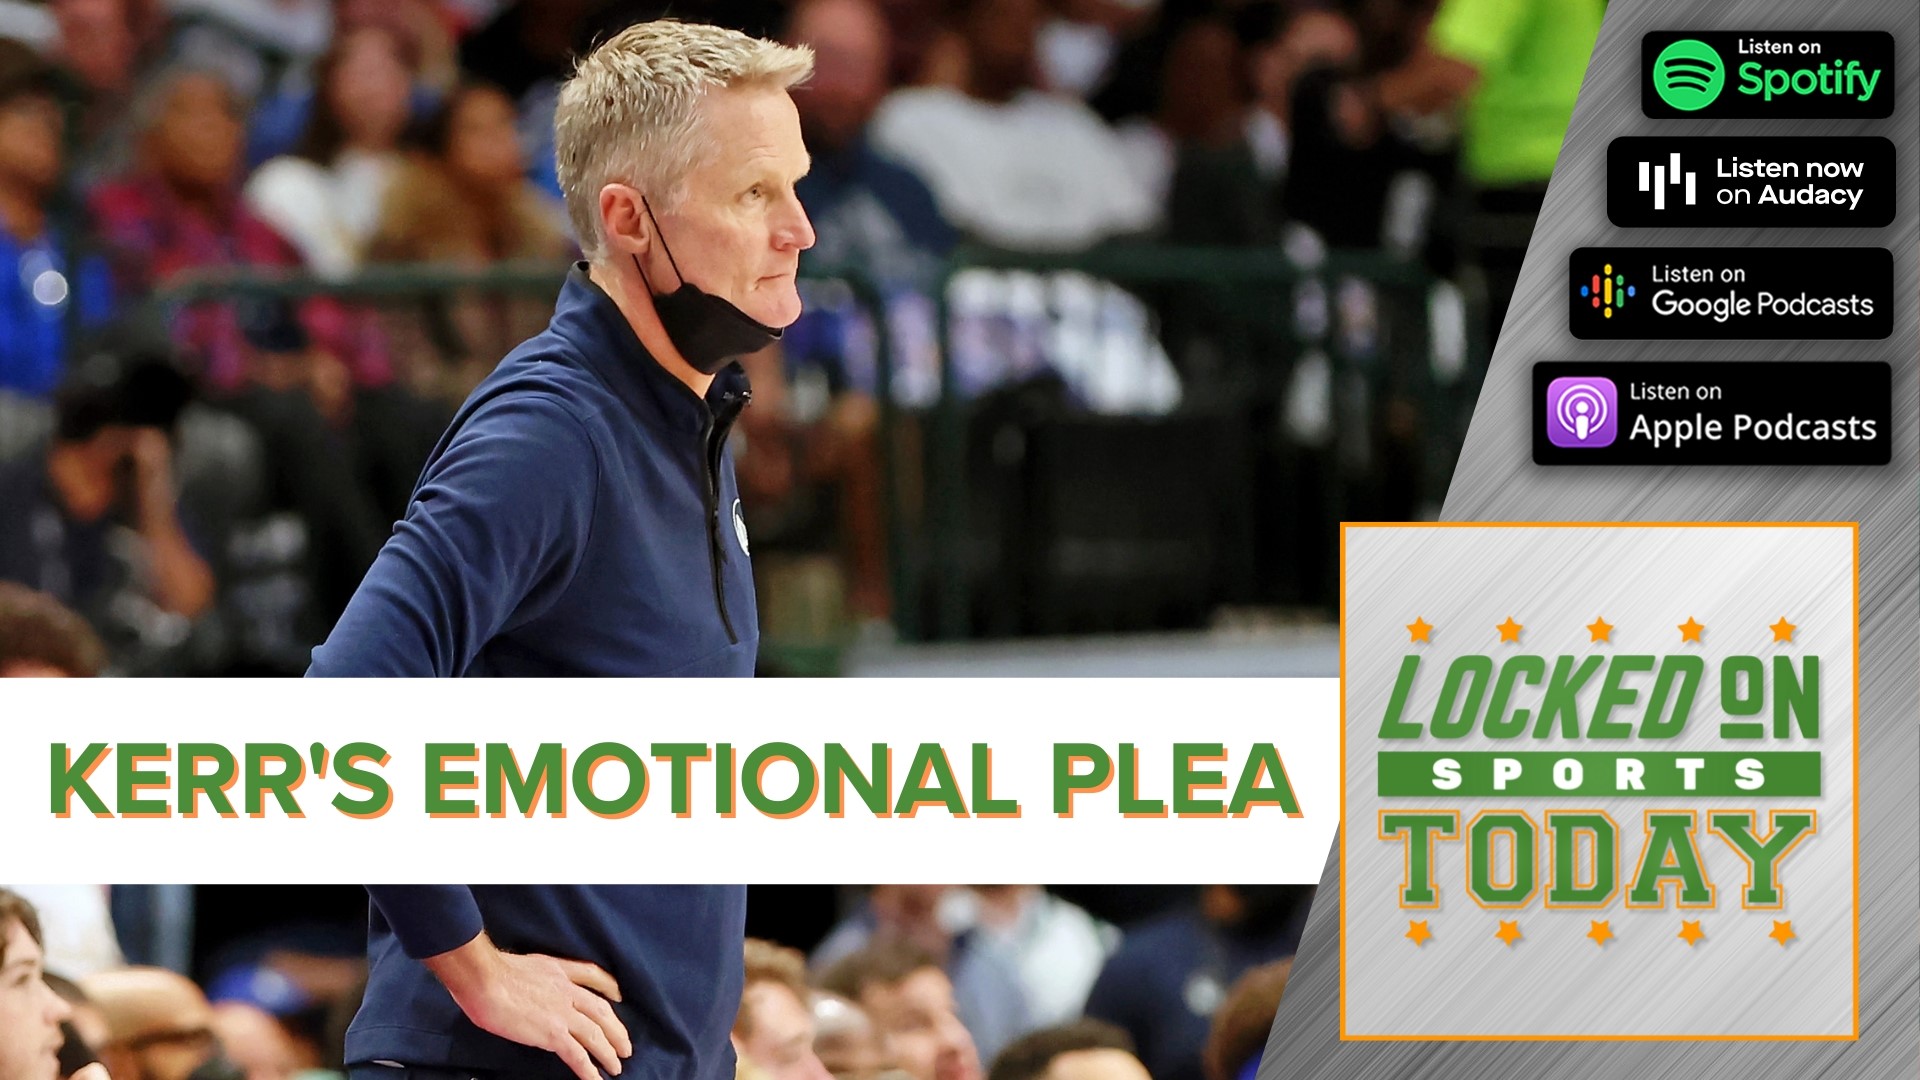 A look at the day's top sports stories from the Mavericks avoiding the sweep to Coach Kerr's powerful plea in the wake of the latest mass shooting